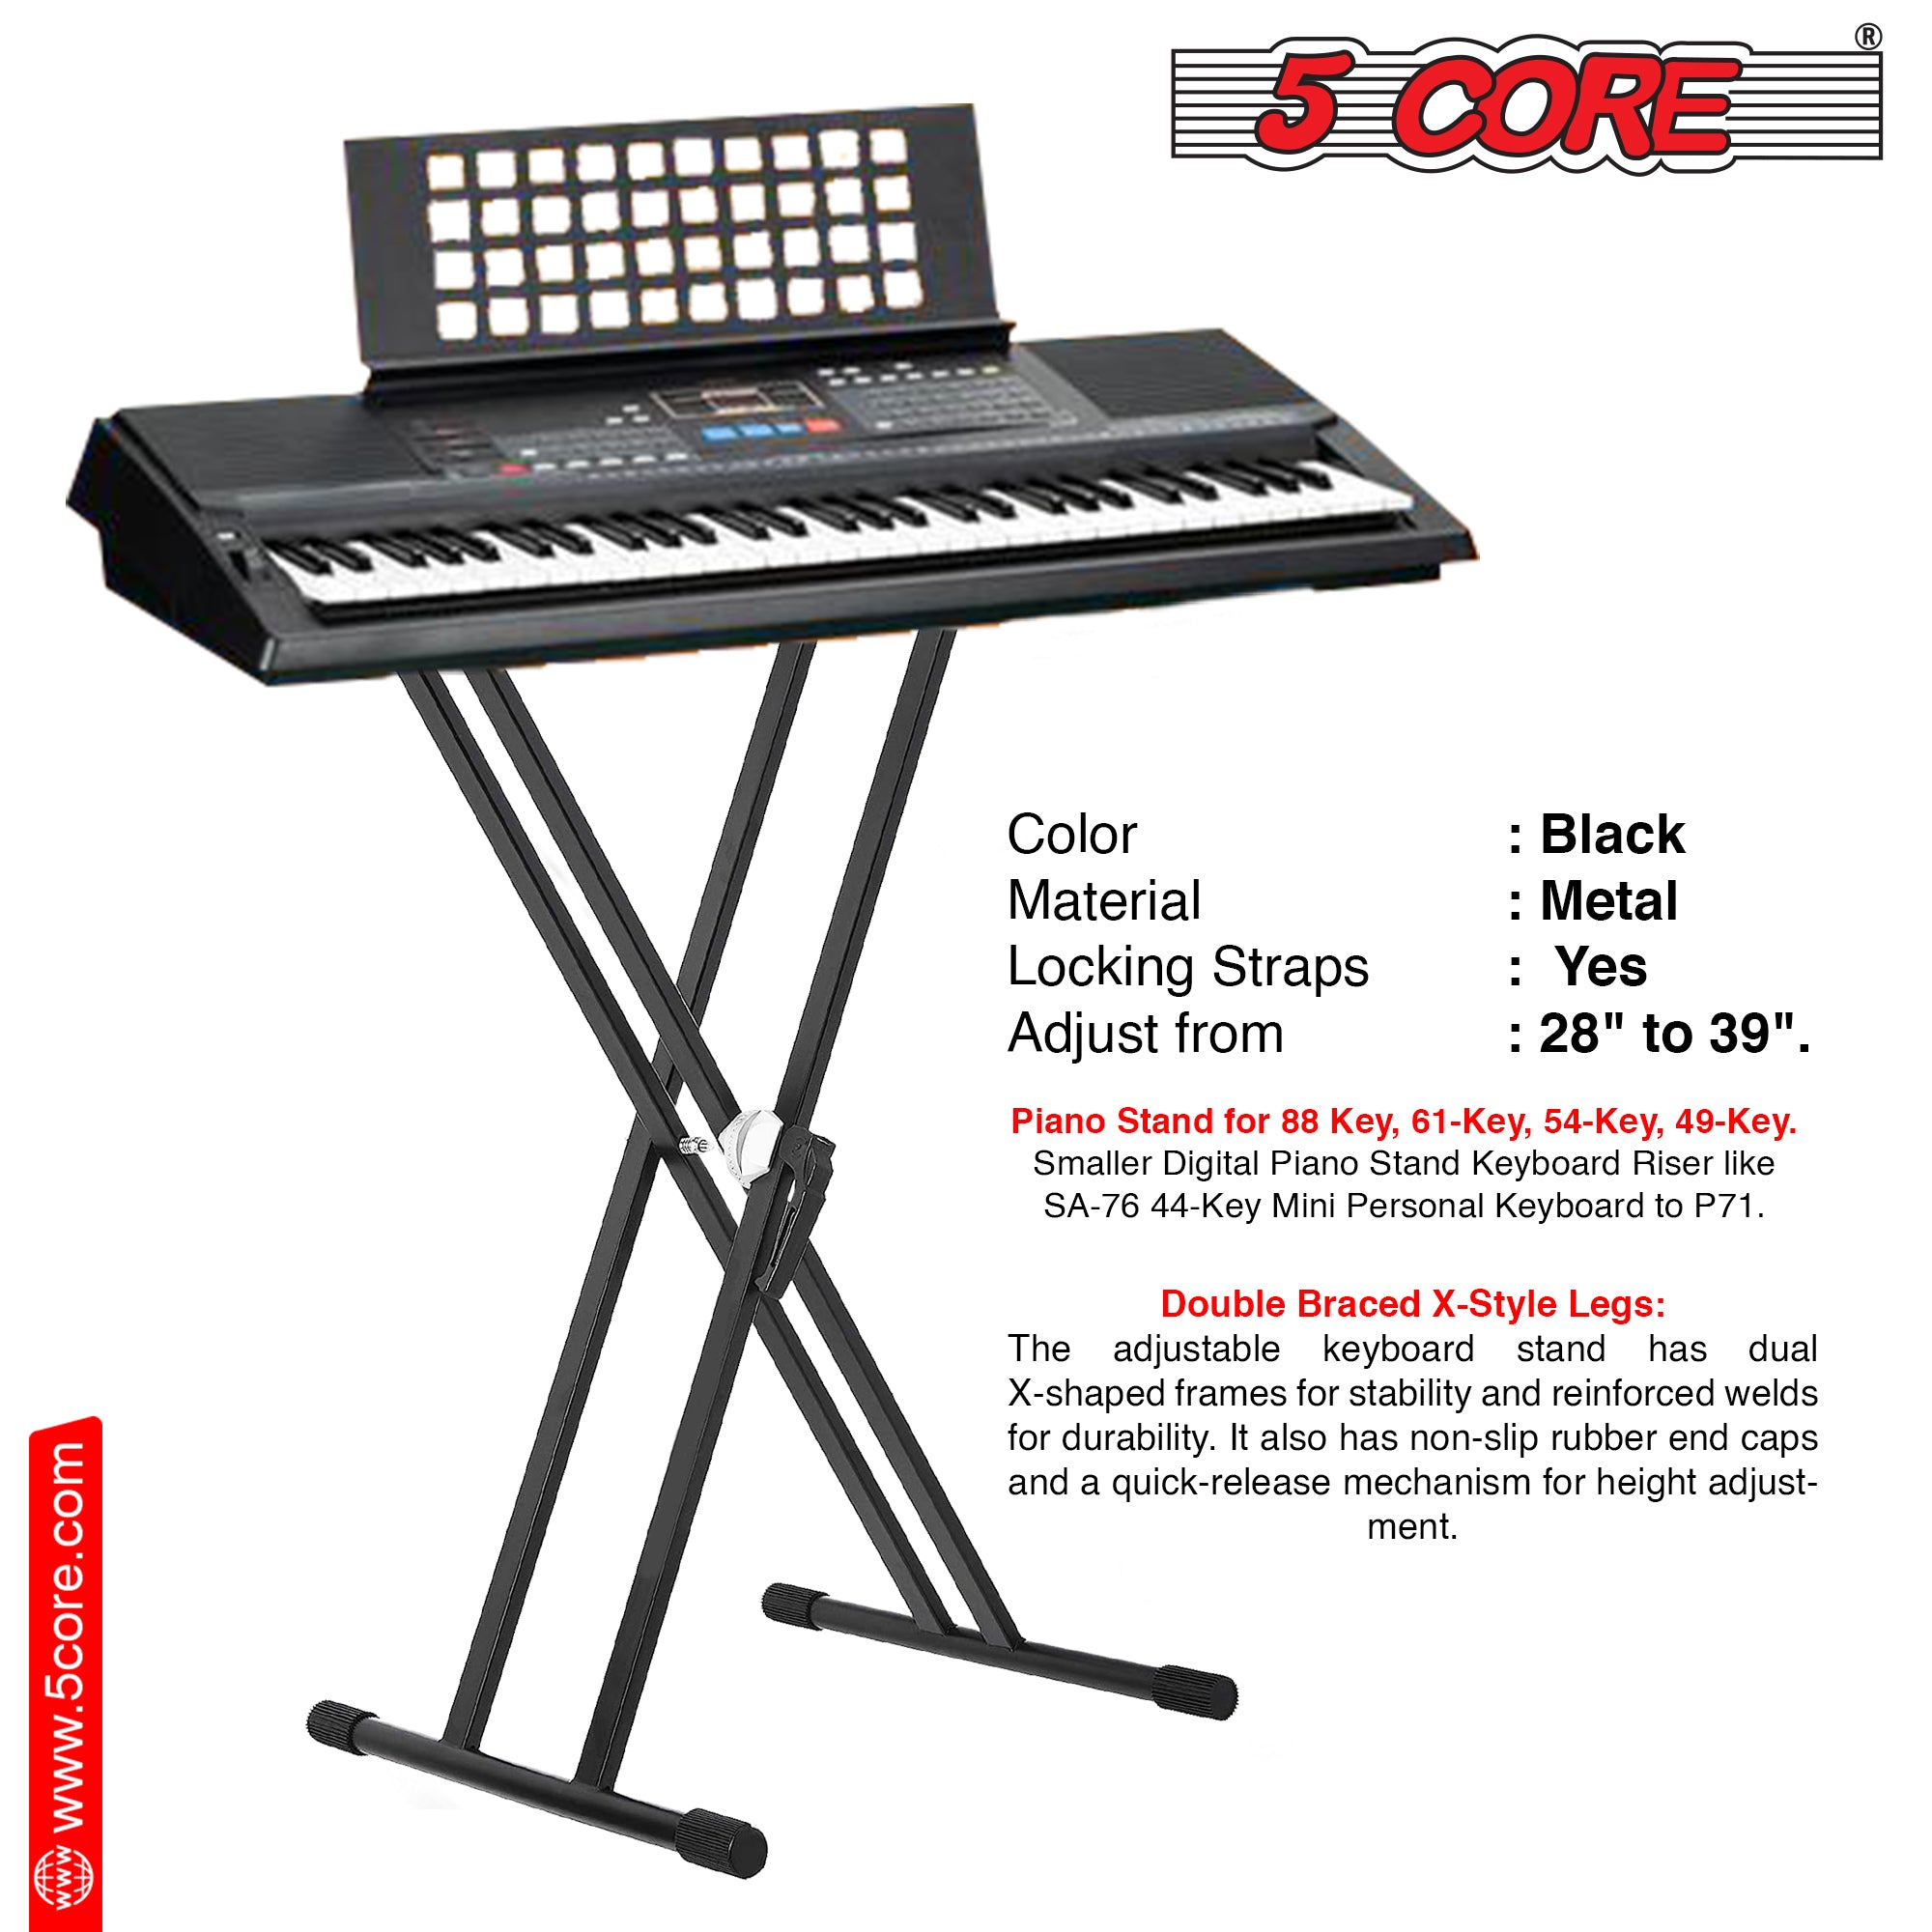 5 Core Piano Stand Double Braced w Gear Adjustable Keyboard Stands Metal X Style On Stage Keyboard Seat Durable & Sturdy -KS 2X GEAR